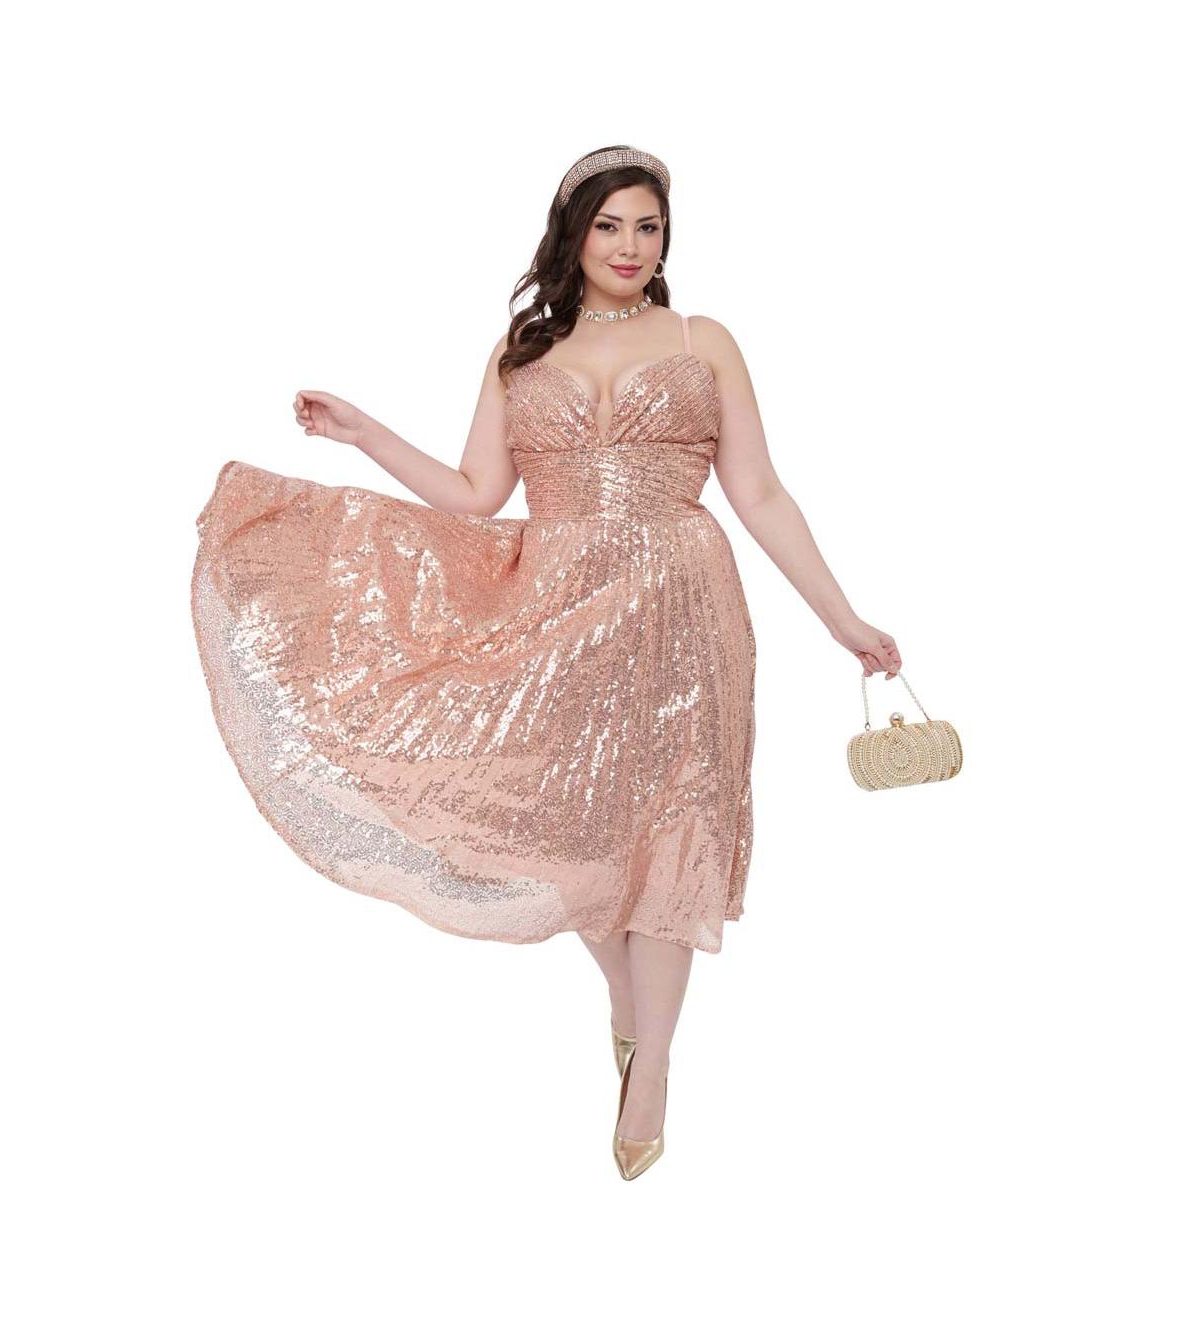 Plus Size 1950s Pleated Swing Dress - Rose gold